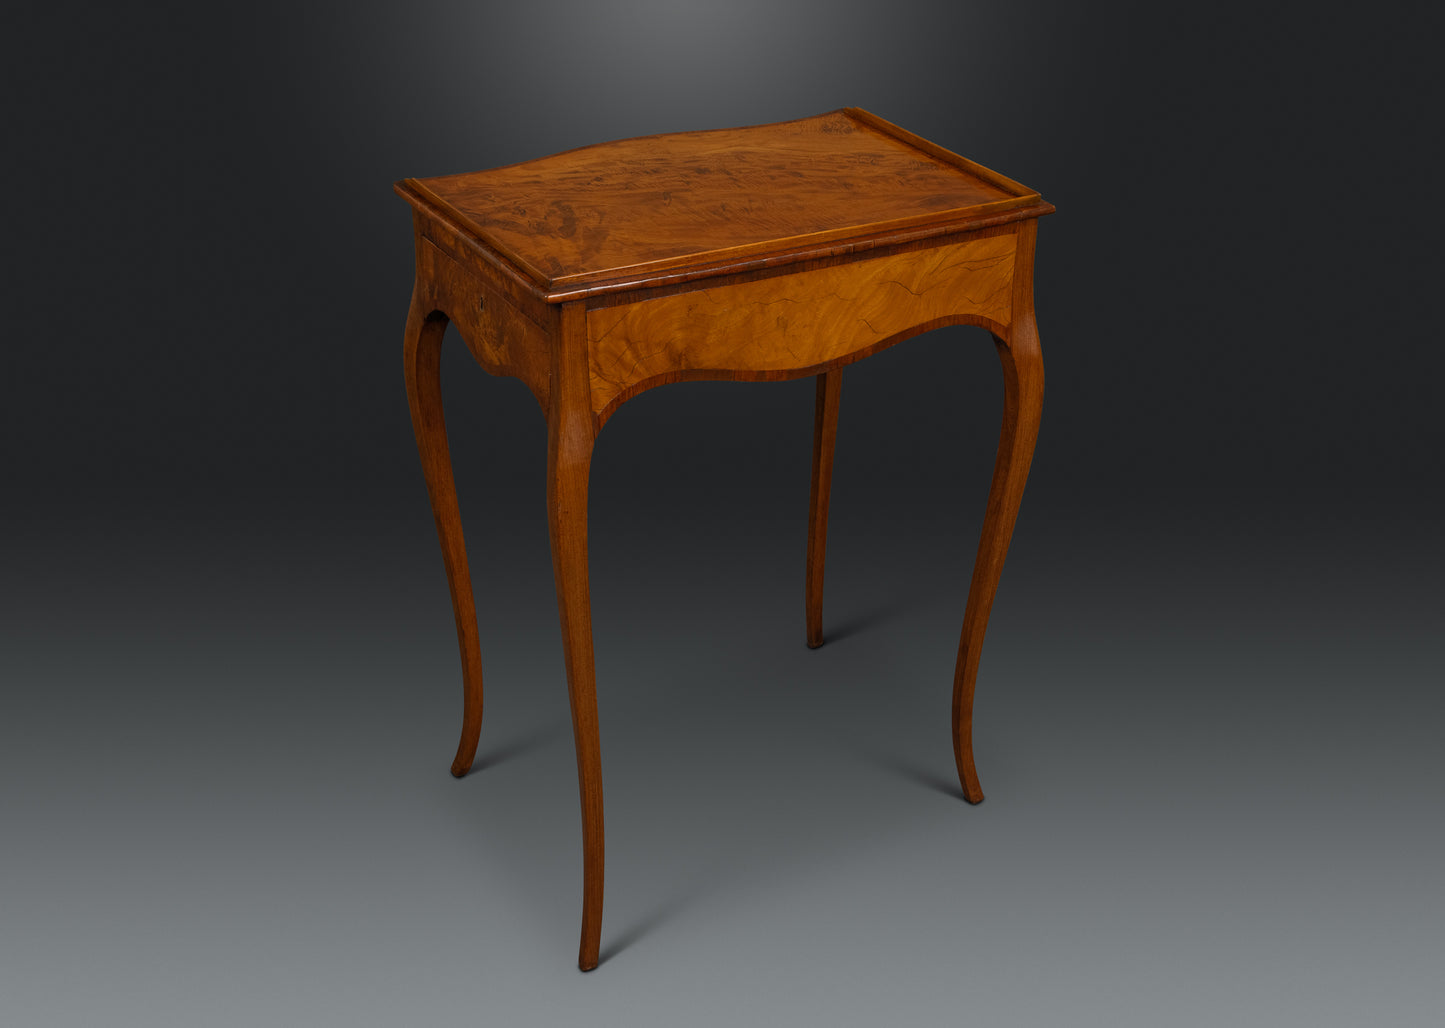 Lady's Writing Table in the Manner of Mayhew and Ince circa 1785